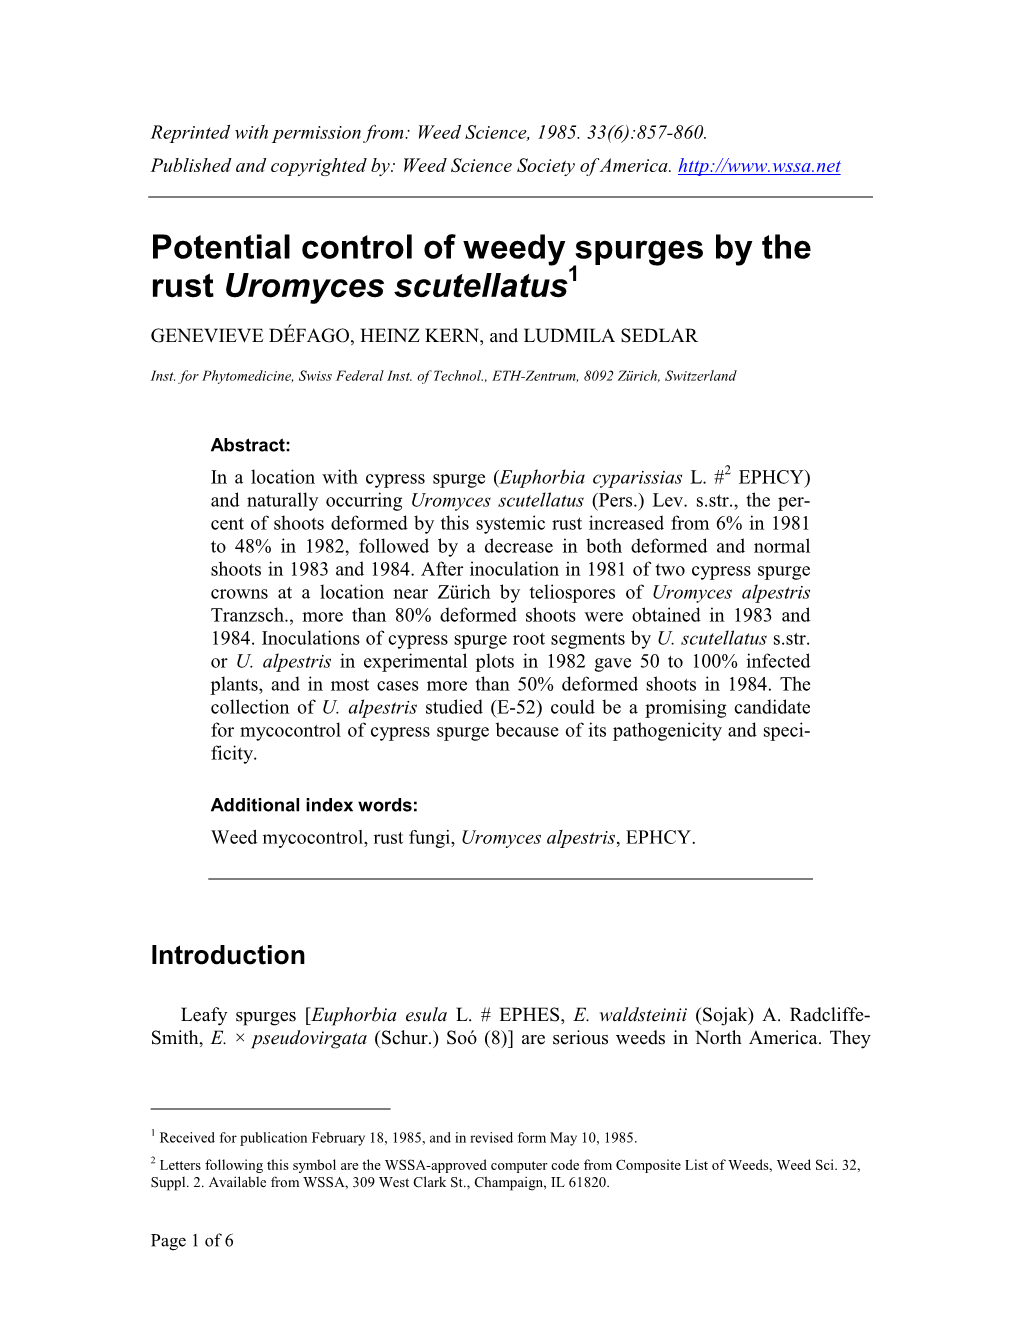 Potential Control of Weedy Spurges by the Rust Uromyces Scutellatus1